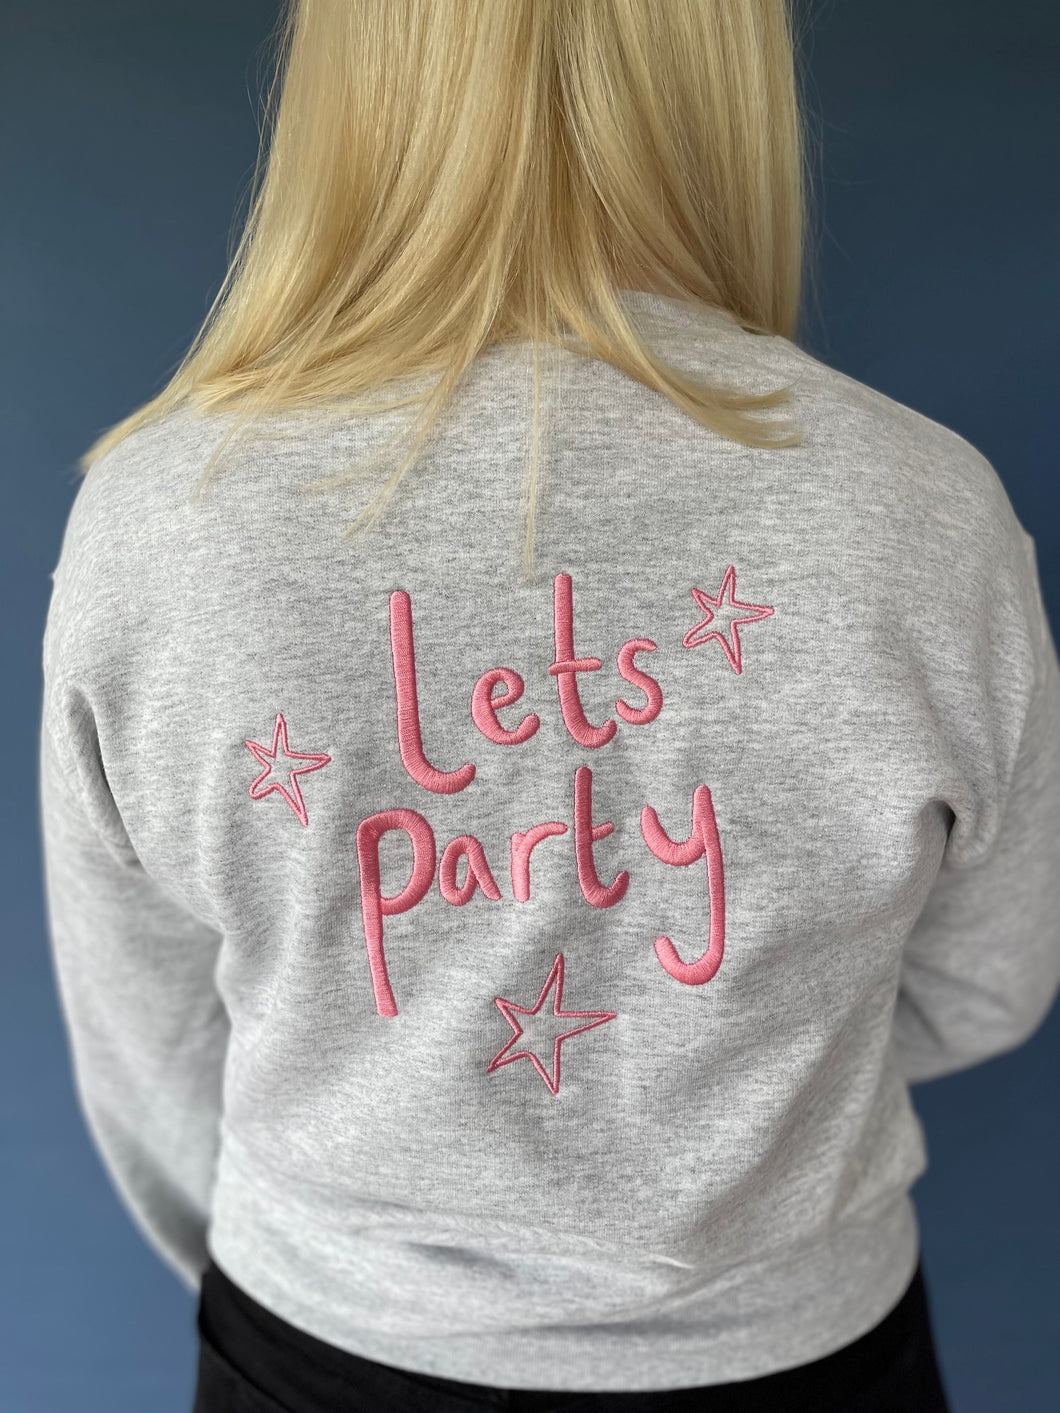 Lets party sweater with sleeve detail